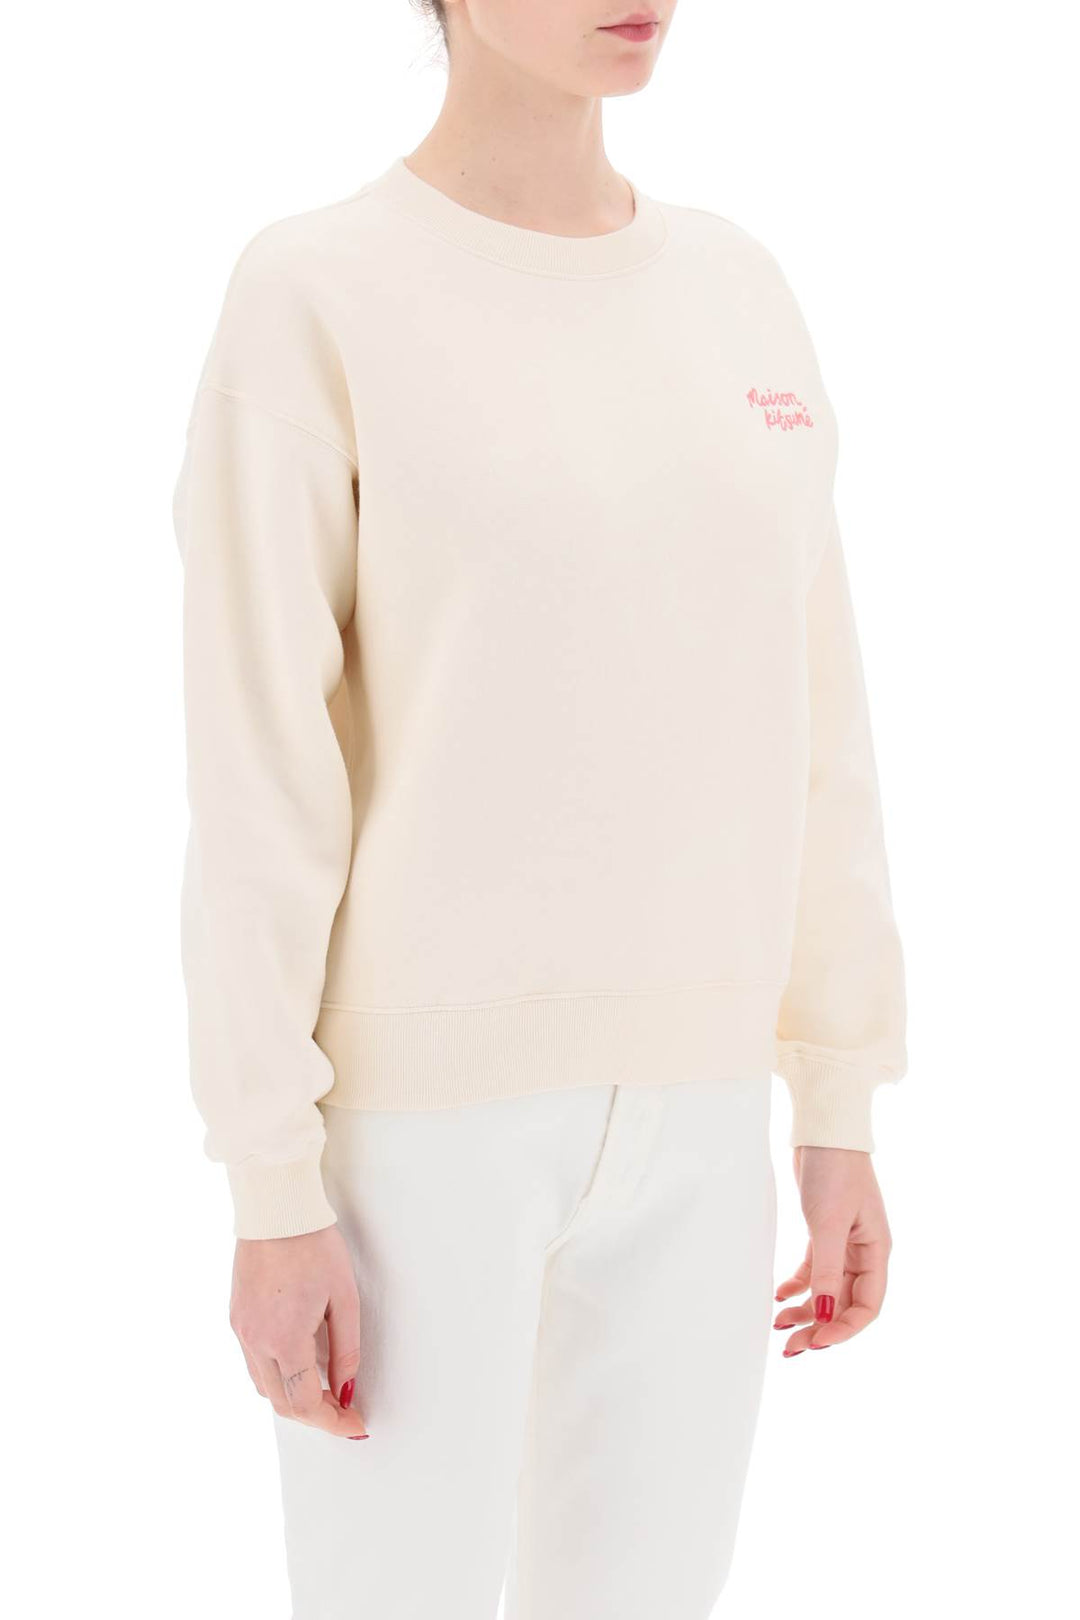 Maison Kitsune Replace With Double Quoteembroidered Logo Crewneck   Rosa